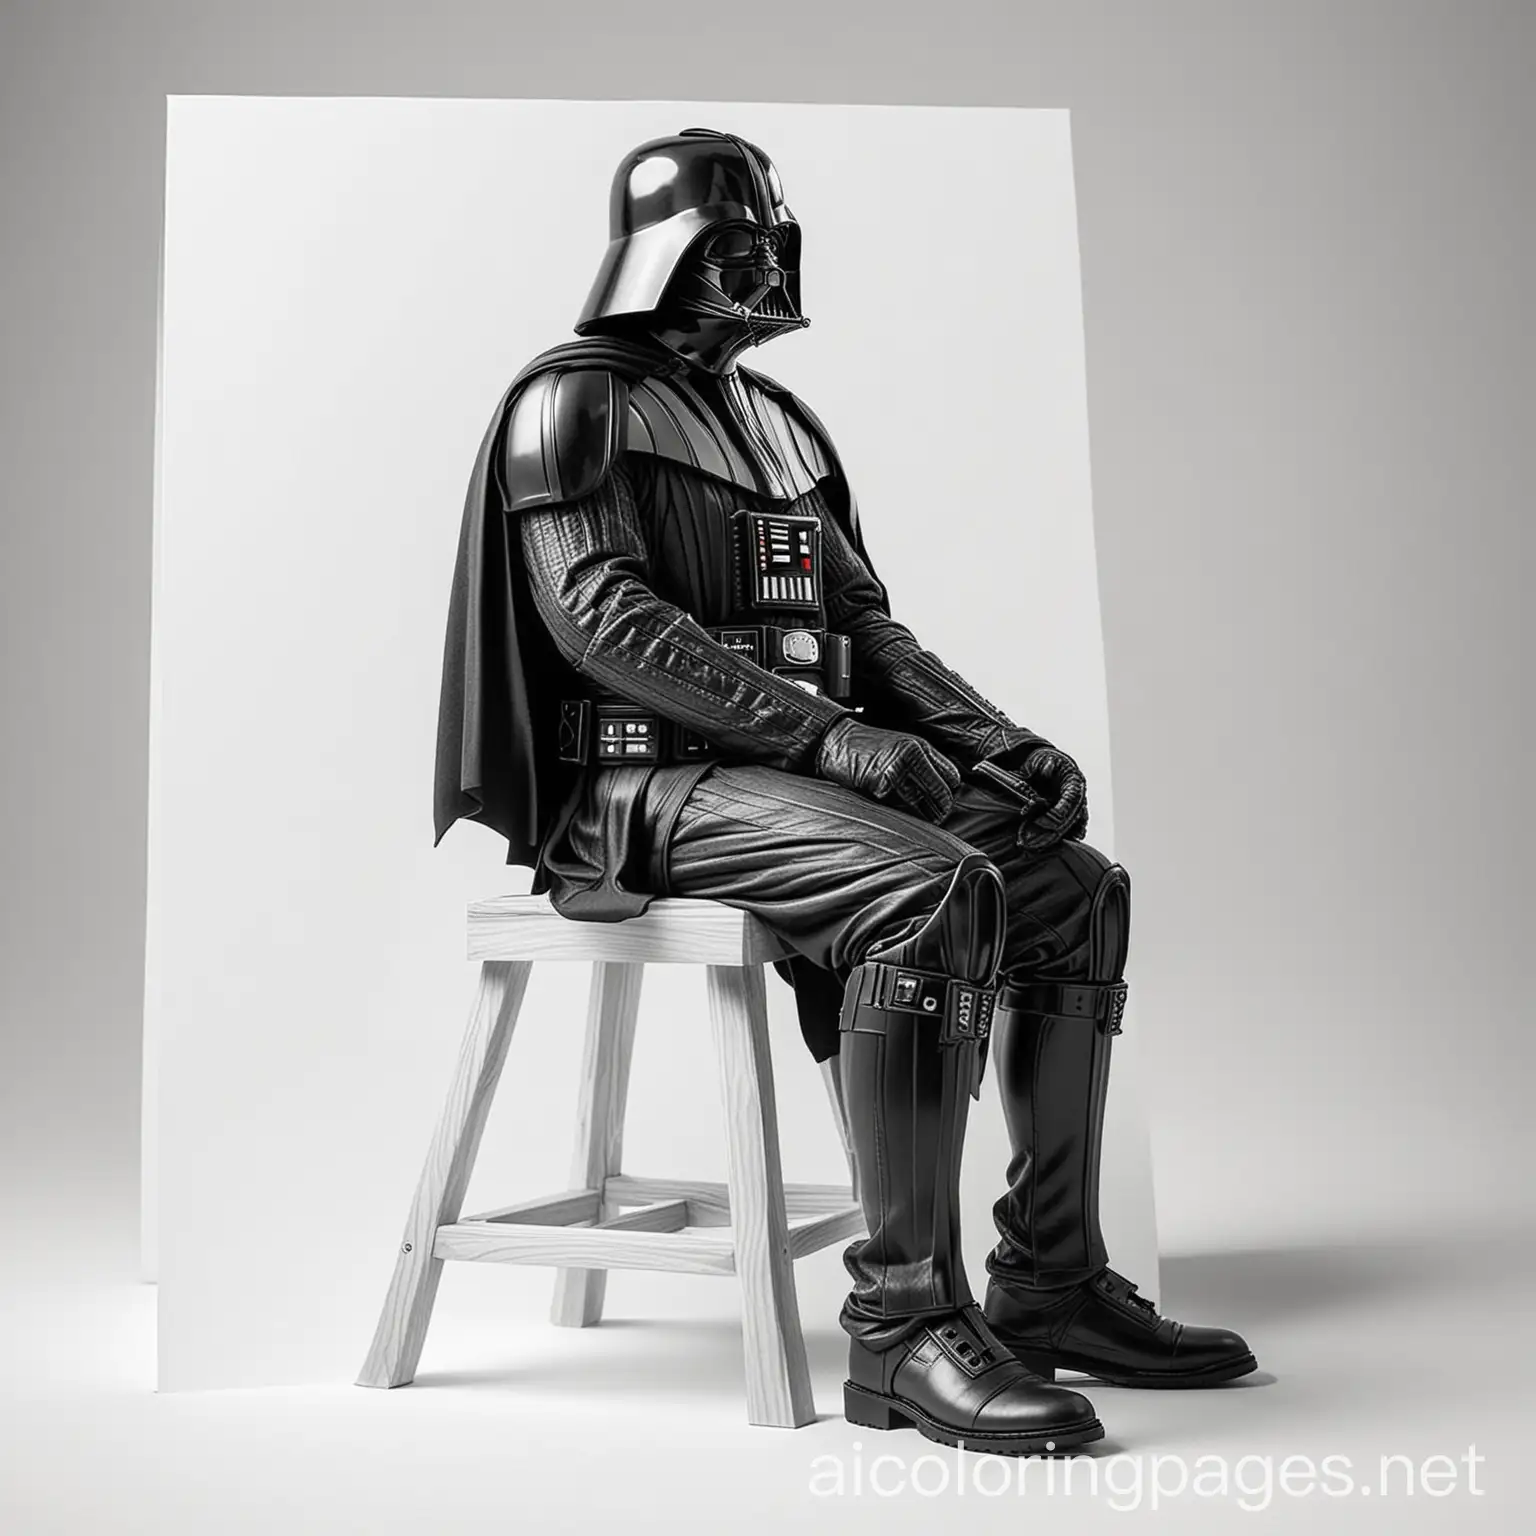 Darth Vader sitting on a  stool facing away, Coloring Page, black and white, line art, white background, Simplicity, Ample White Space. The background of the coloring page is plain white to make it easy for young children to color within the lines. The outlines of all the subjects are easy to distinguish, making it simple for kids to color without too much difficulty